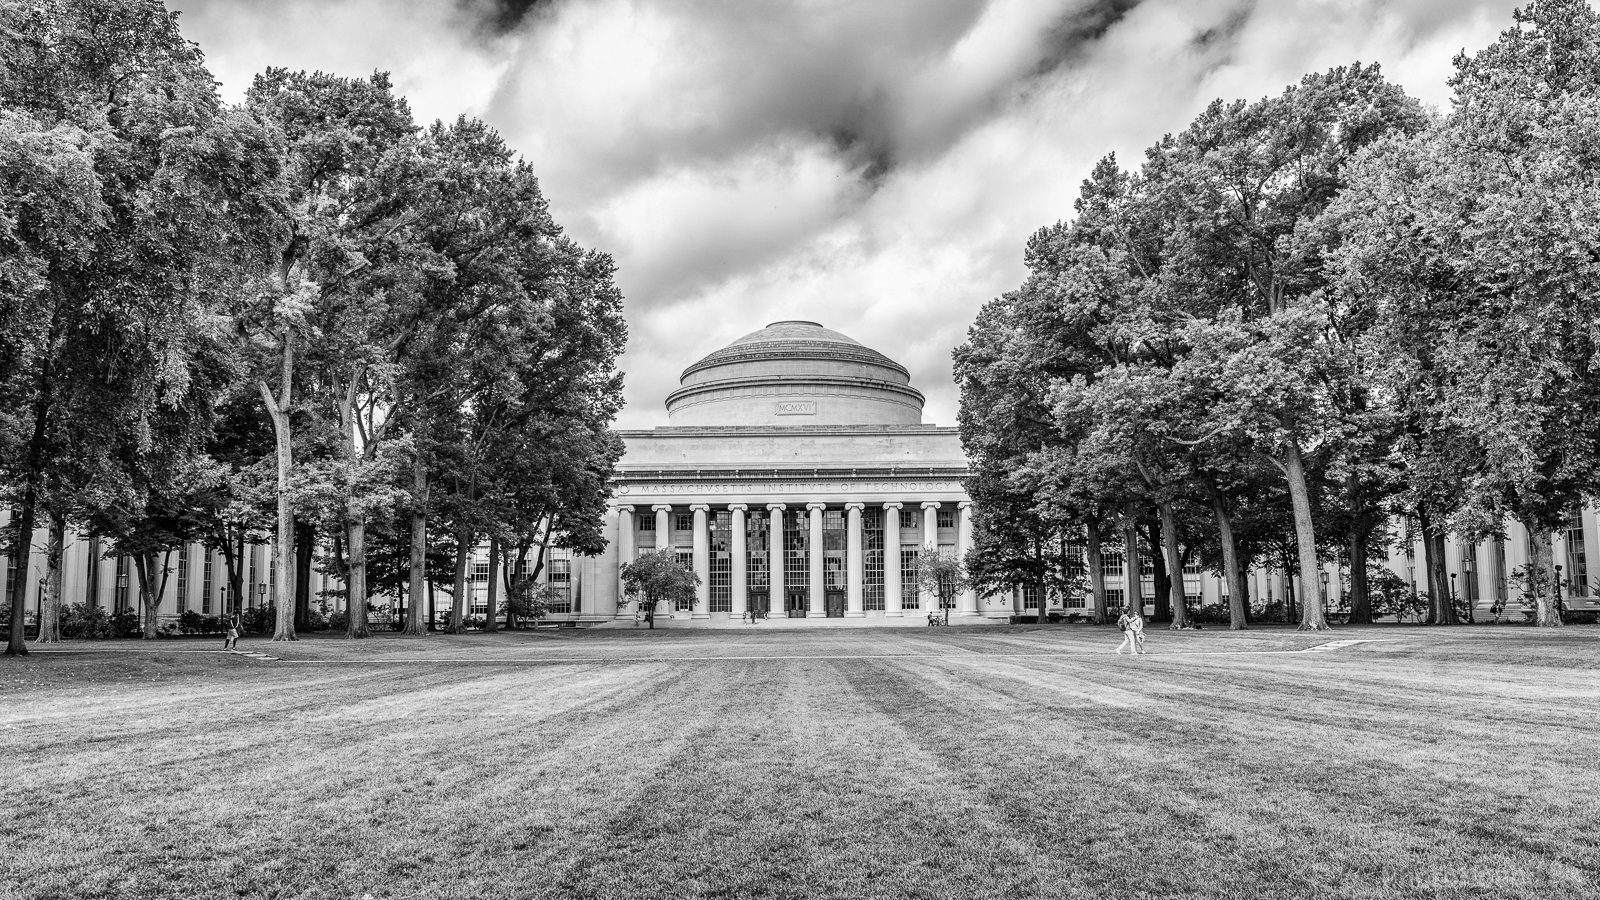 Image of The Great Dome, at MIT by James Billings.